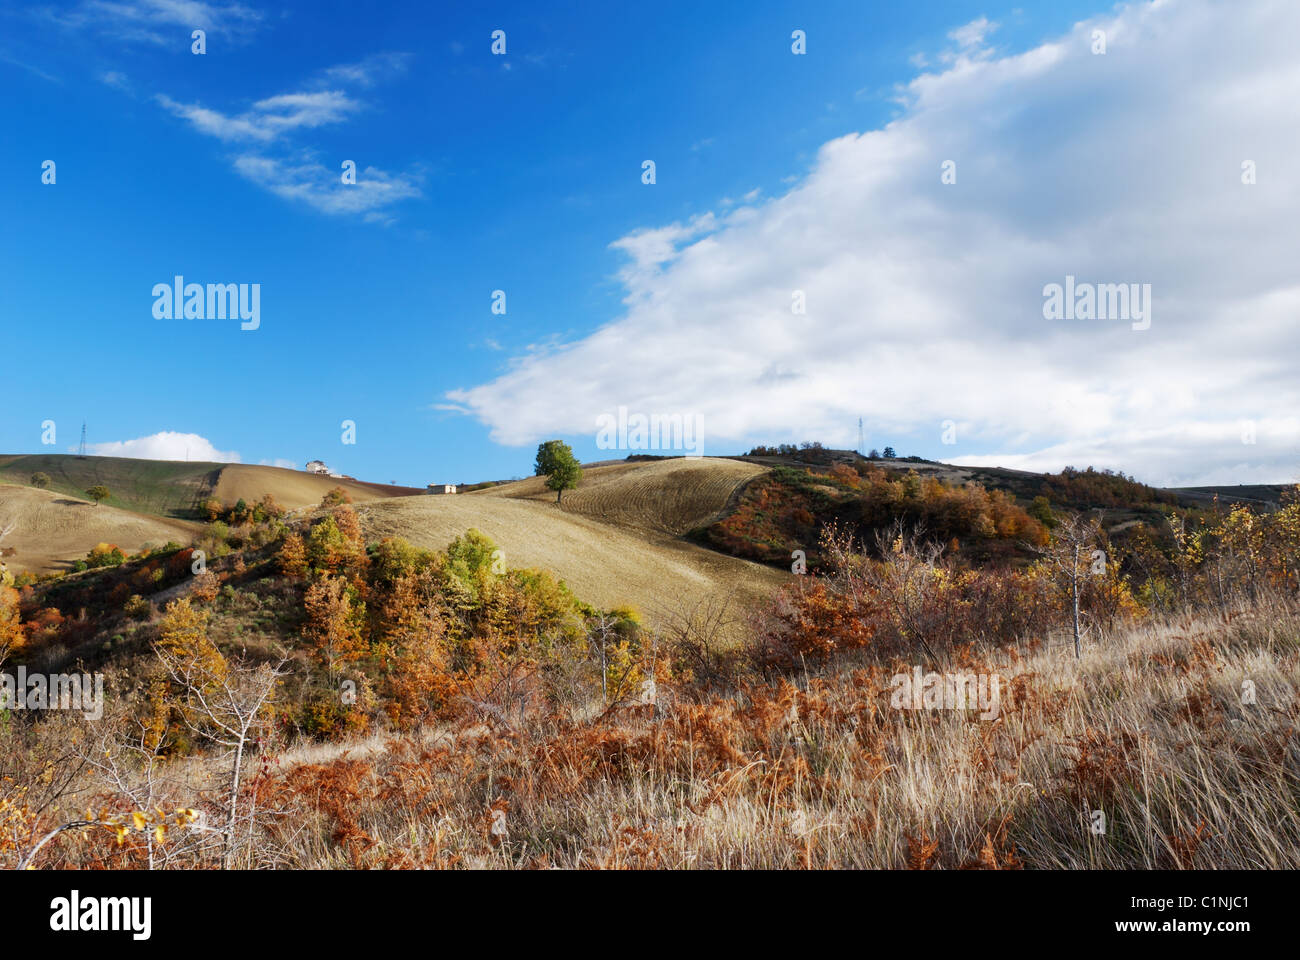 Dry grass and fall colors on hillside in center Italy Stock Photo